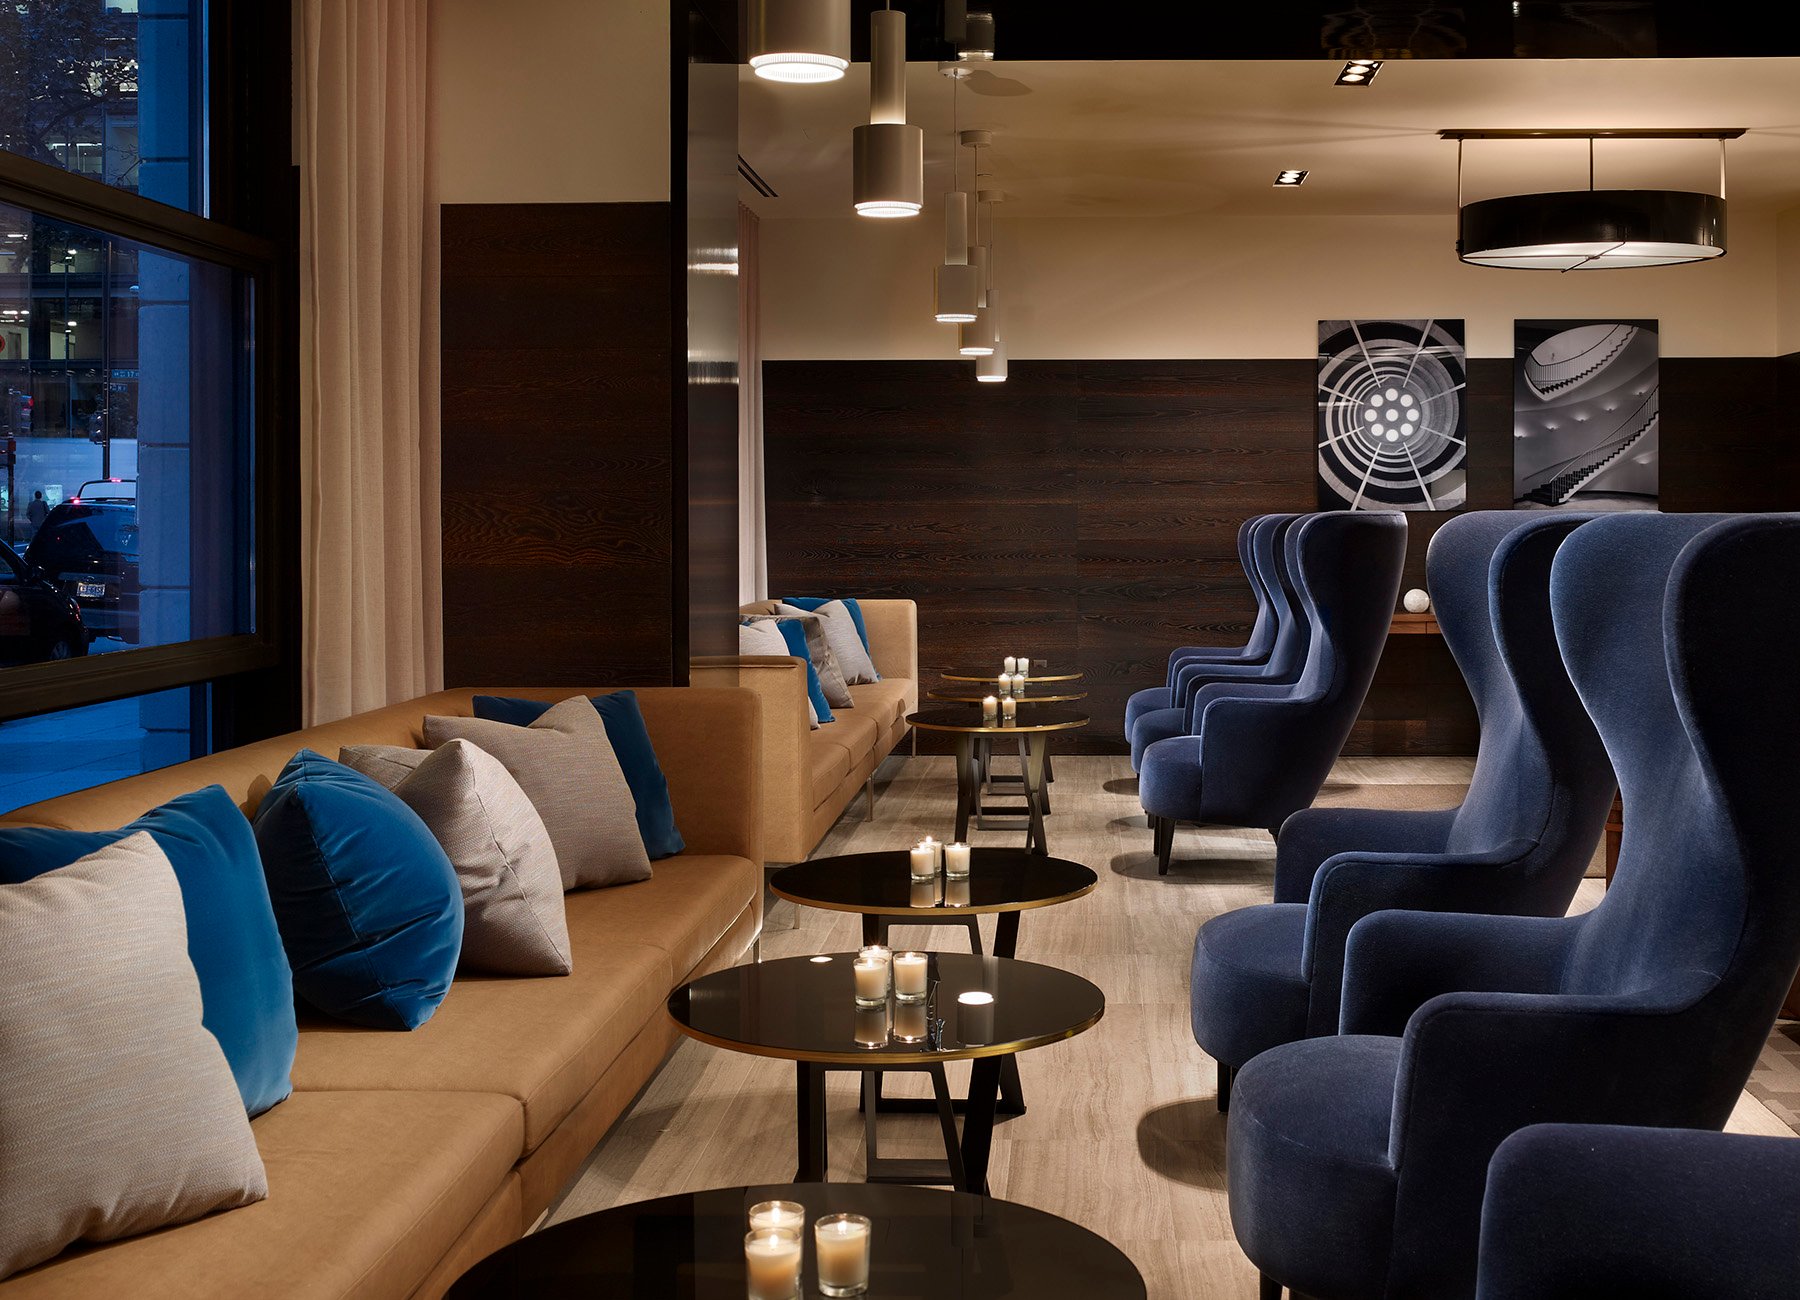 Lobby with small tables and large blue chairs to relax in